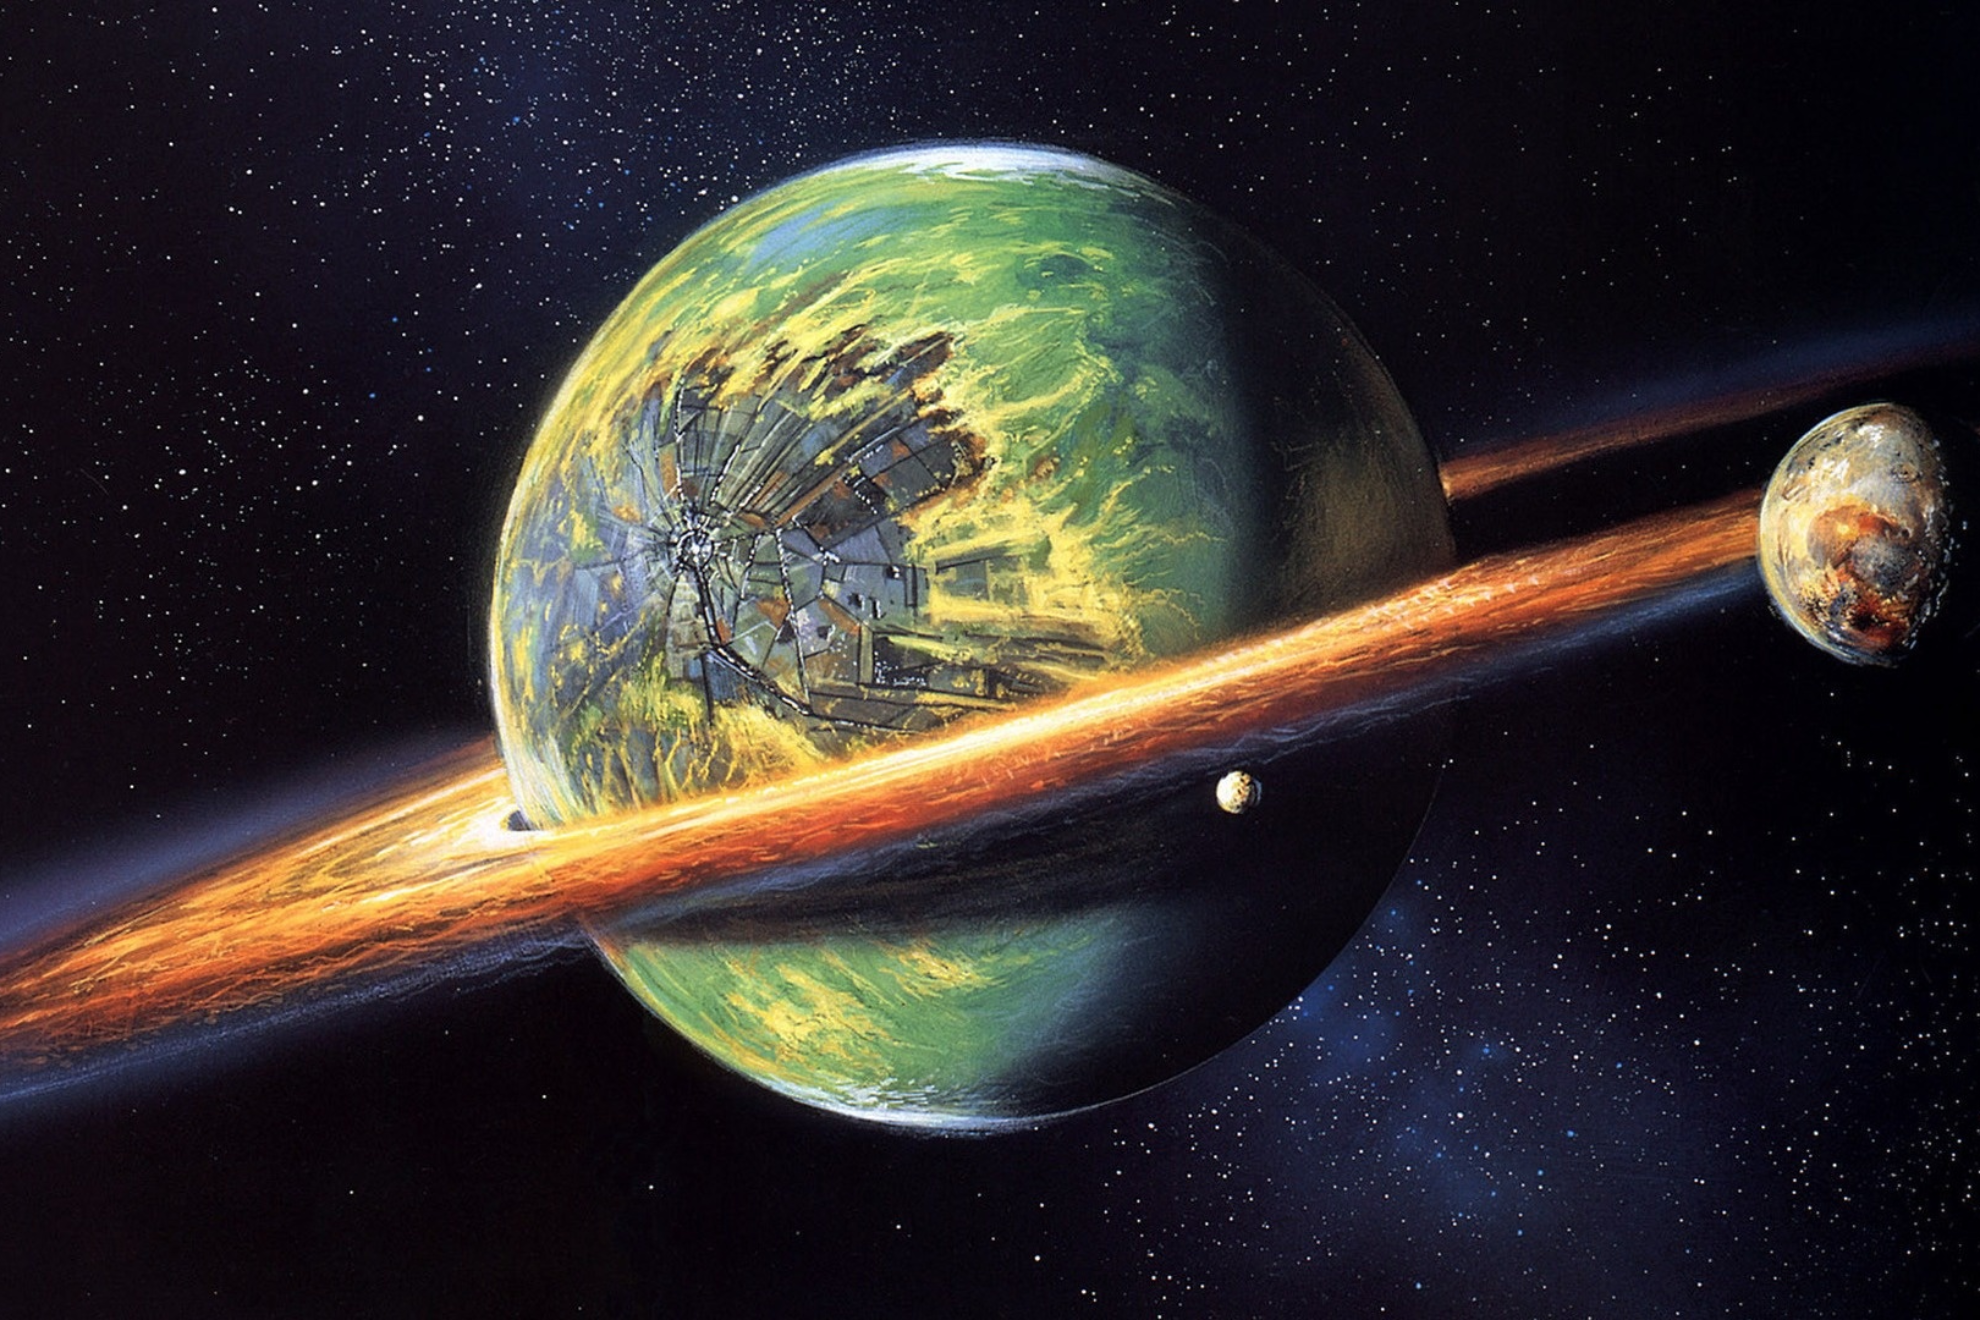 Scientists make extraordinary claim that aliens can move planets